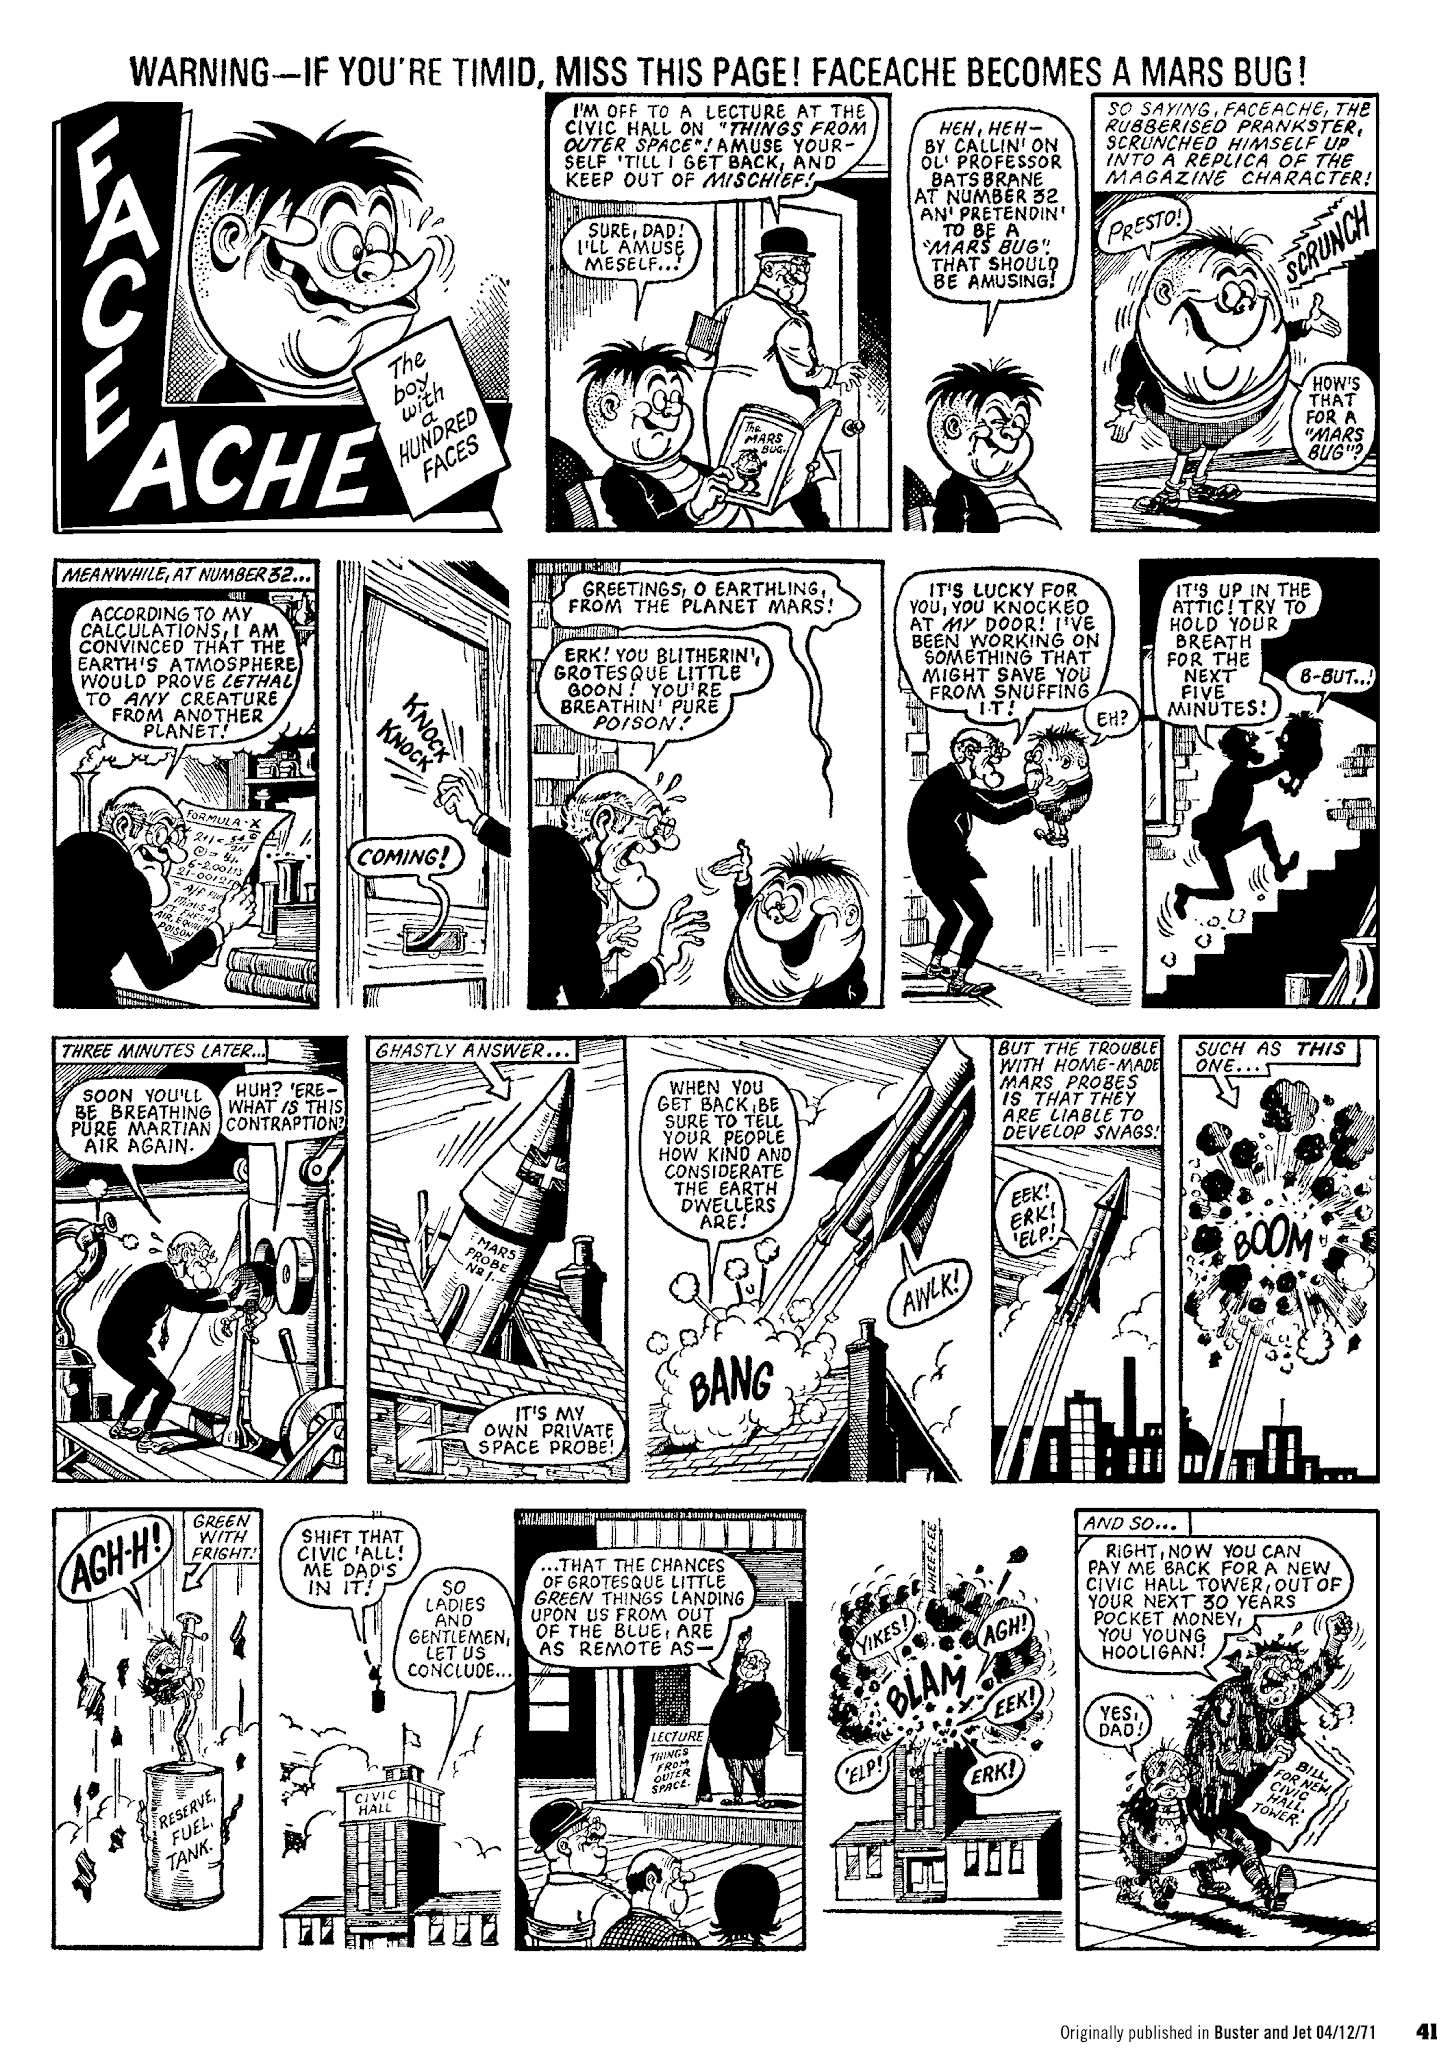 Read online Faceache: The First Hundred Scrunges comic -  Issue # TPB 1 - 43